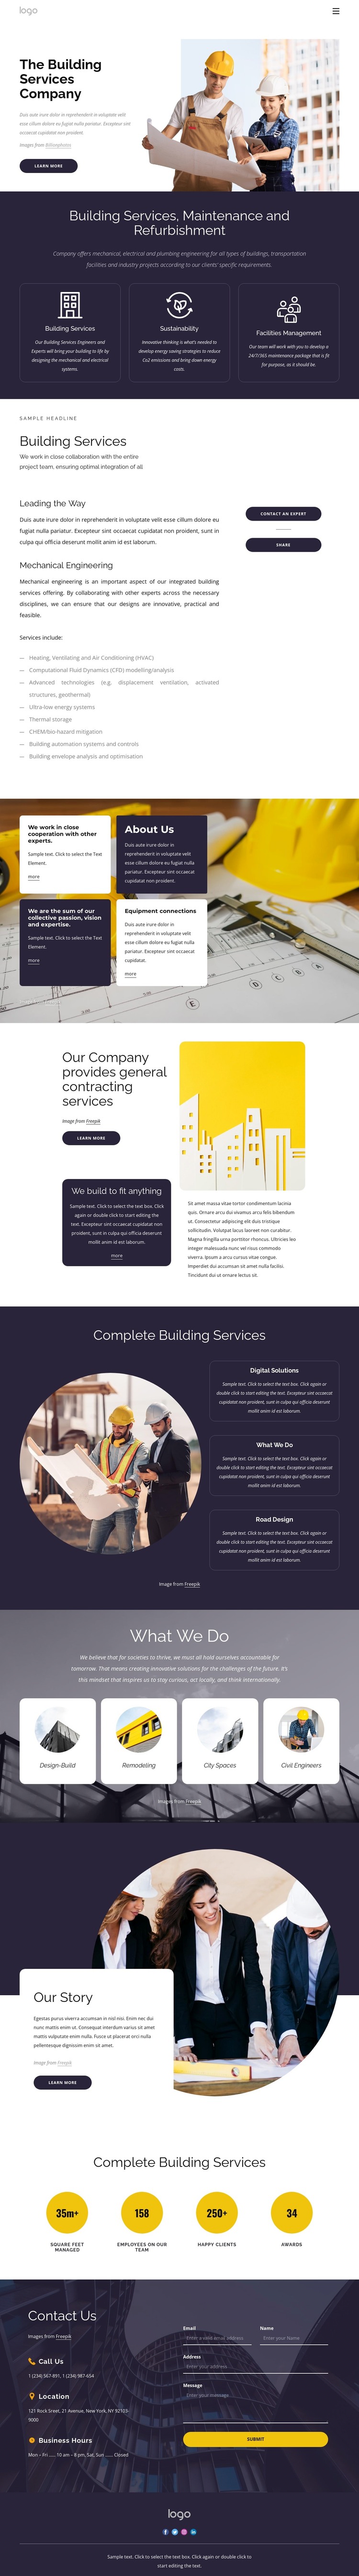 The building services company WordPress Theme